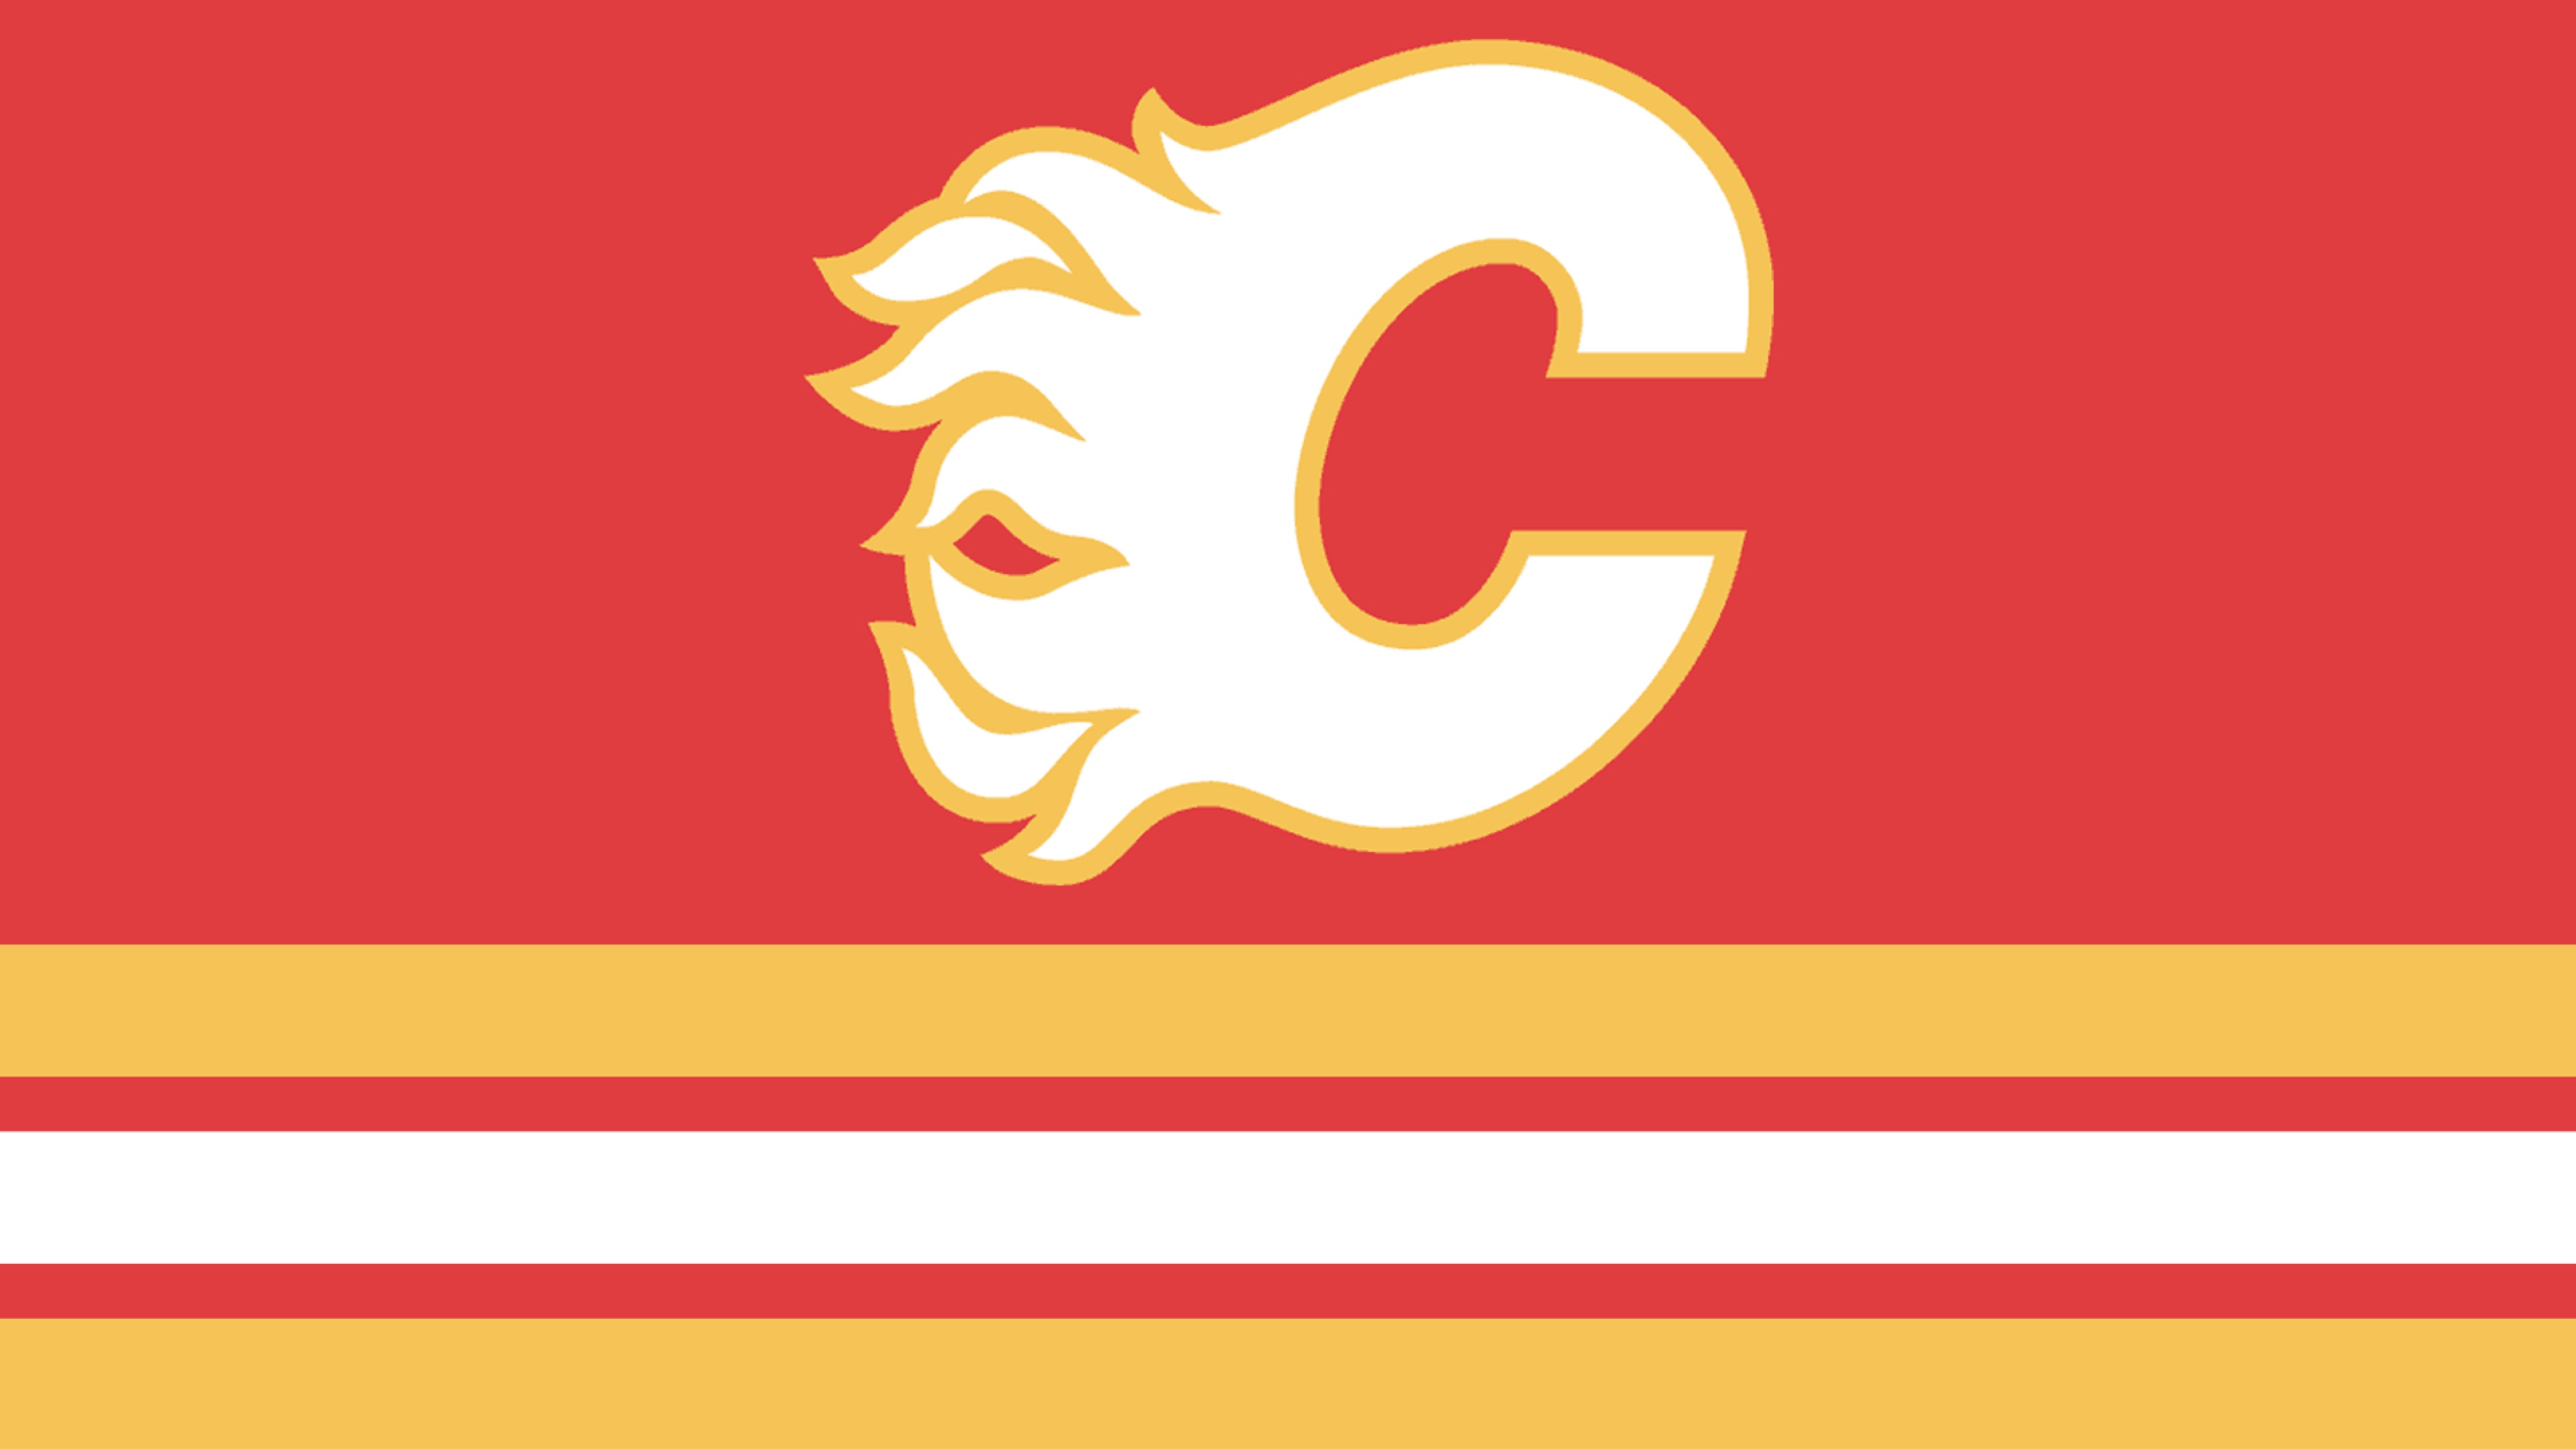 Calgary Flames Wallpapers and Background Images   stmednet